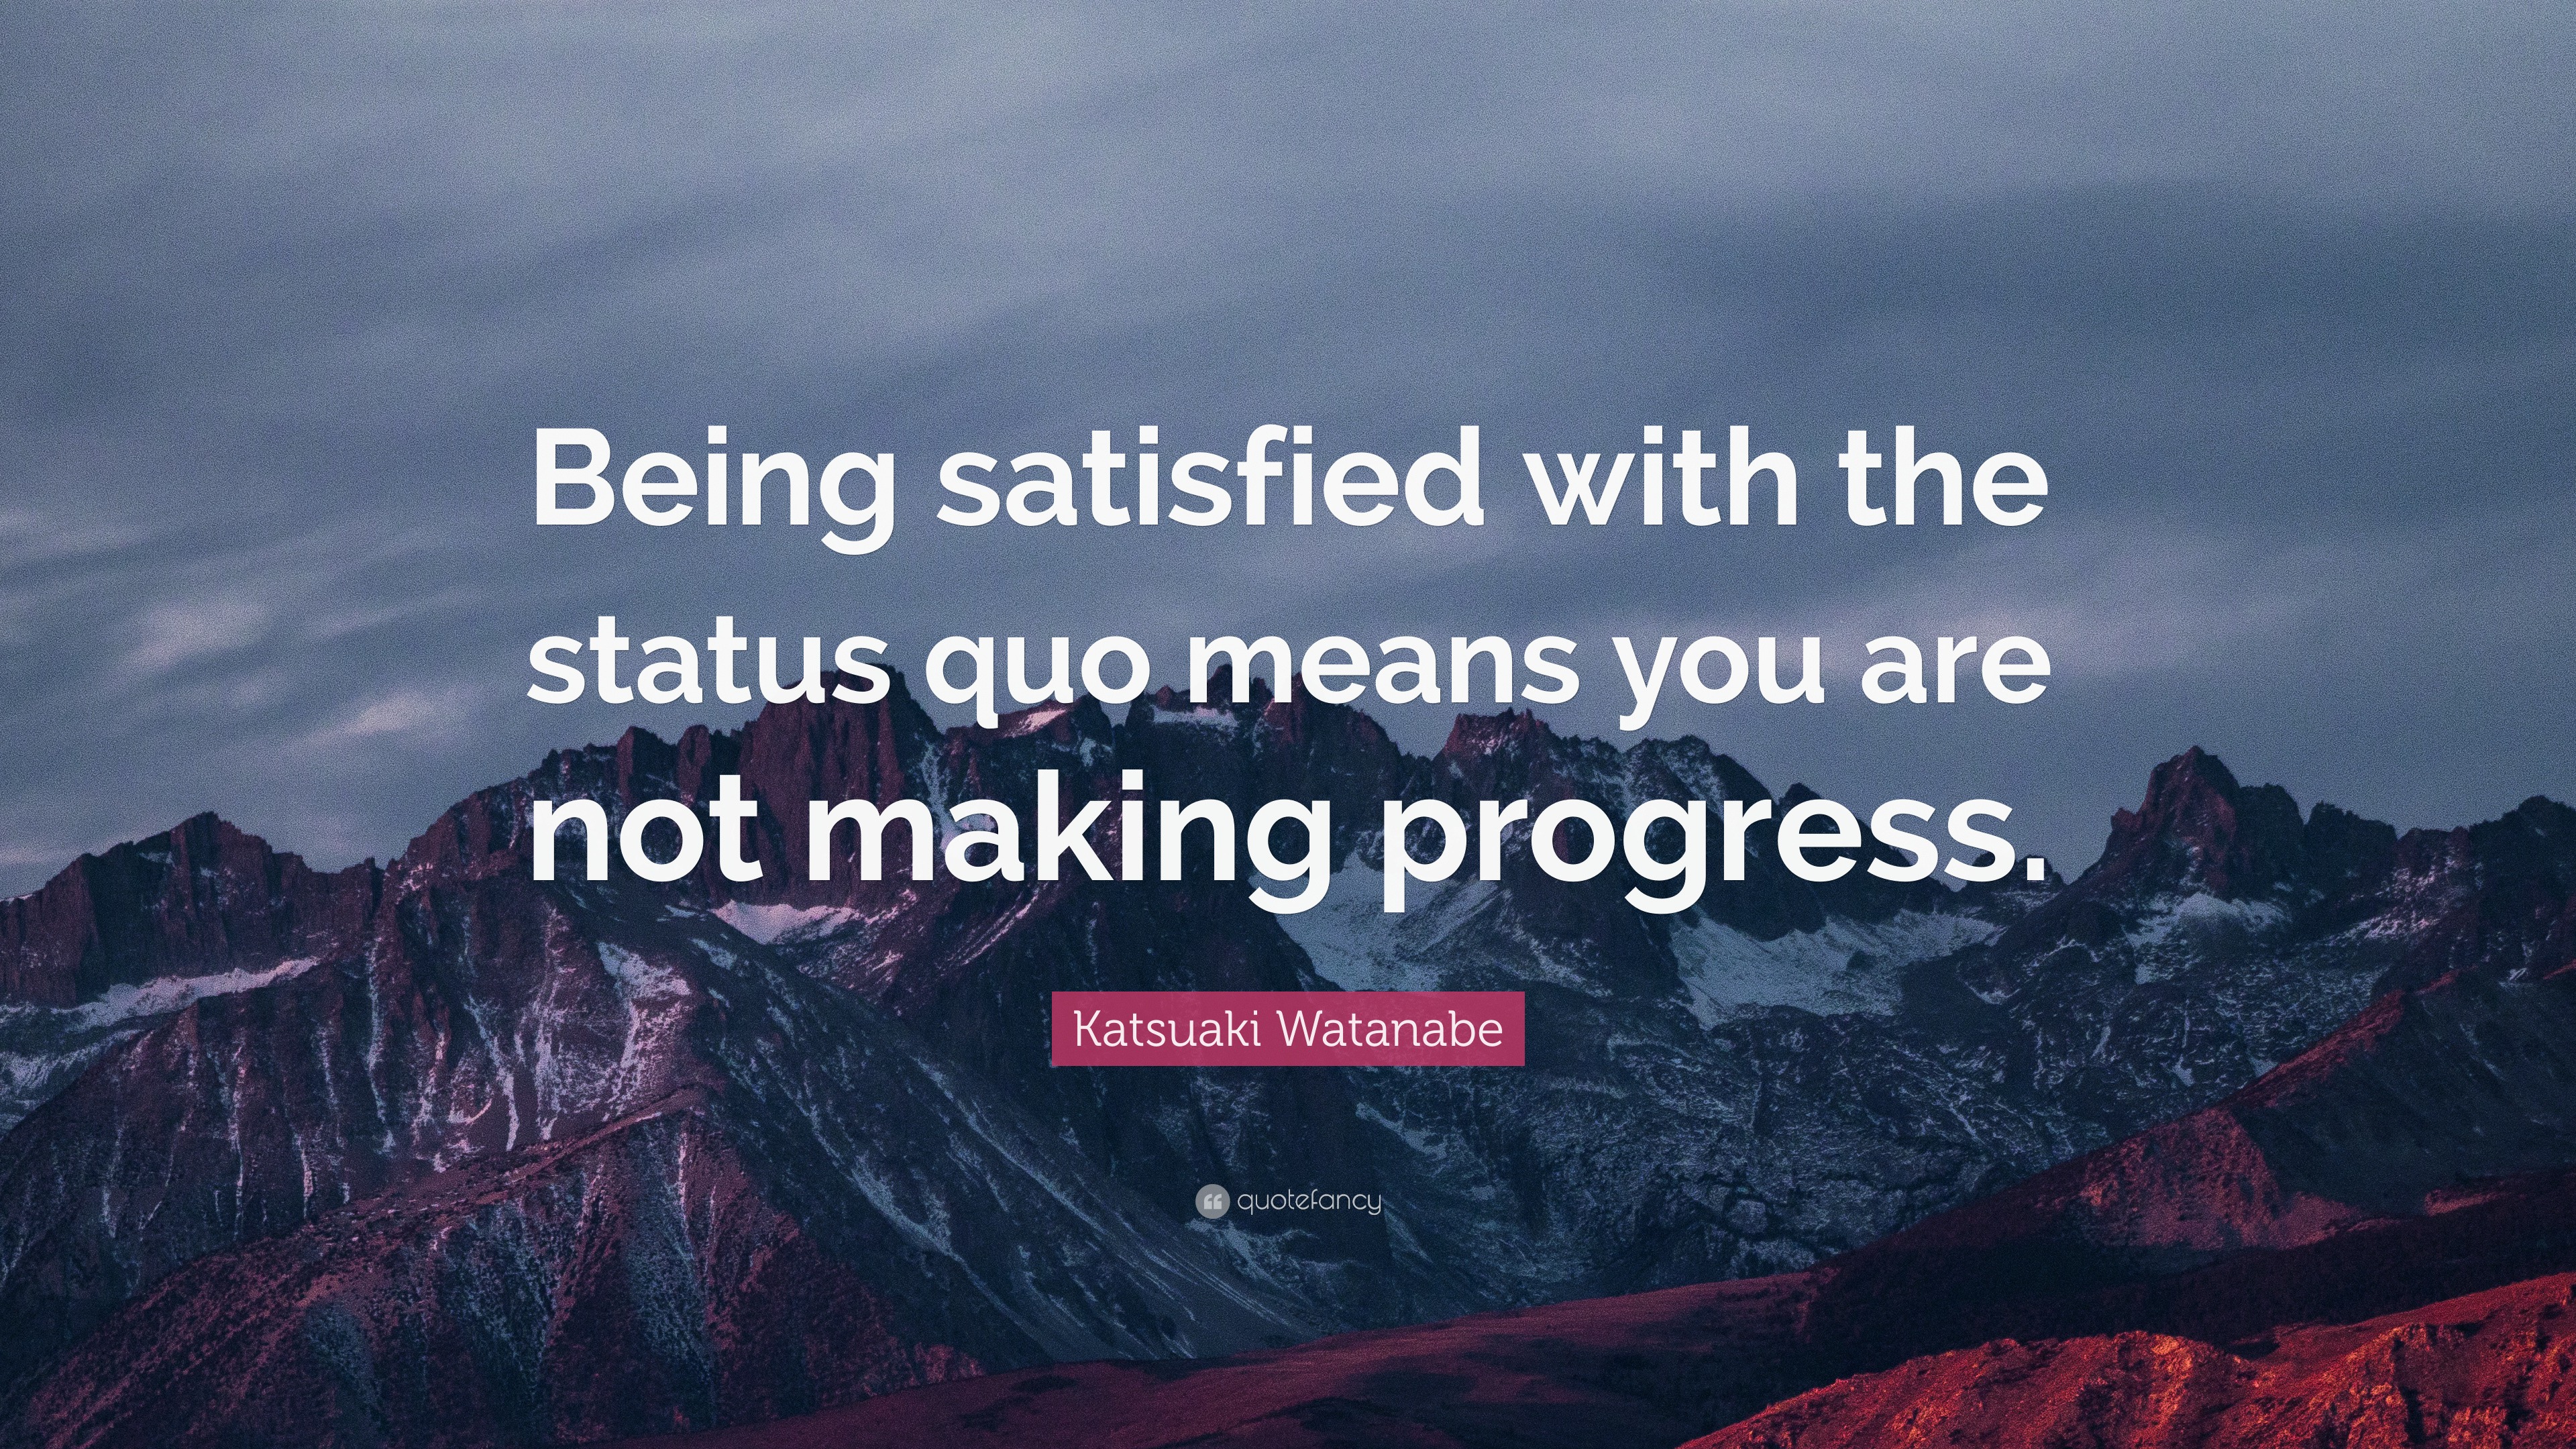 Katsuaki Watanabe Quote Being Satisfied With The Status Quo Means You Are Not Making Progress